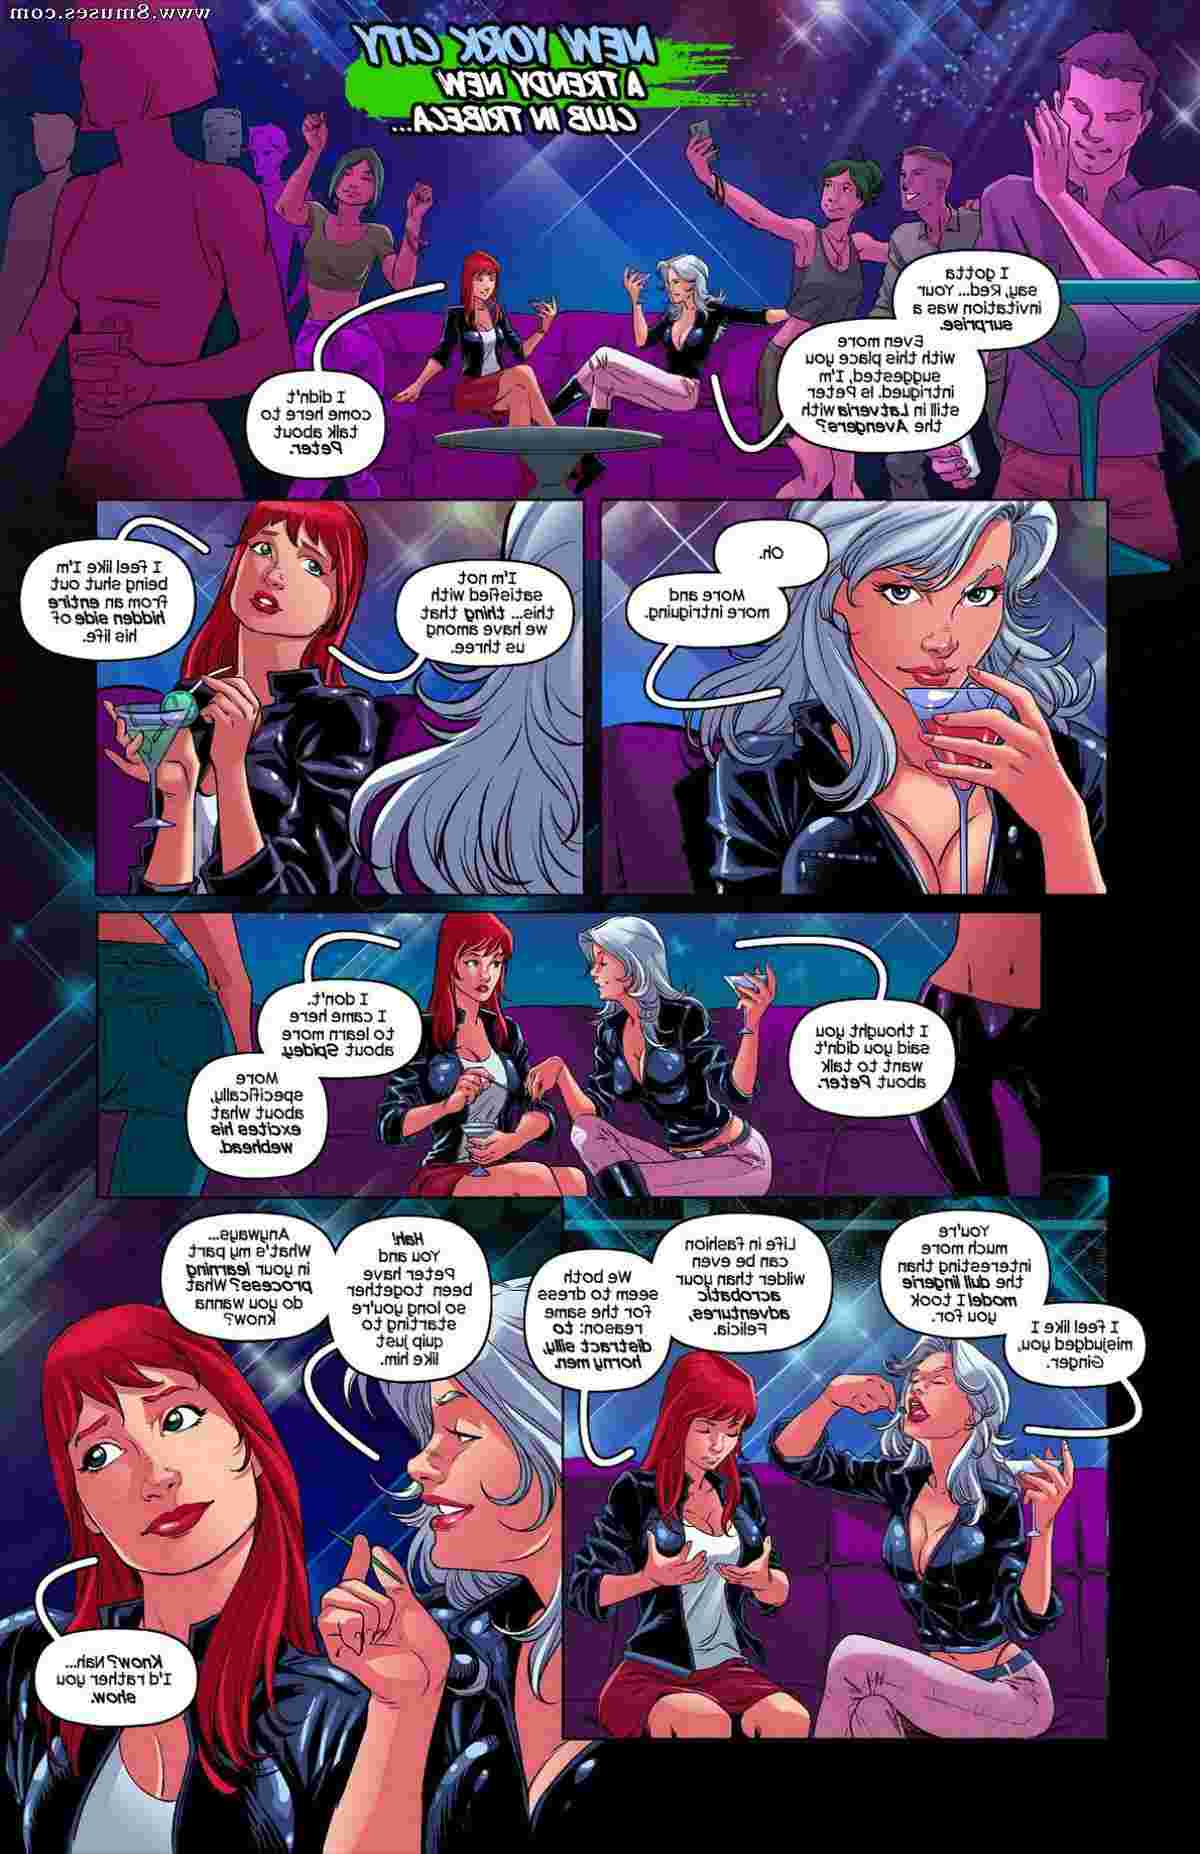 Tracy-Scops-Comics/Spider-Lovers-Club Spider_Lovers_Club__8muses_-_Sex_and_Porn_Comics_3.jpg